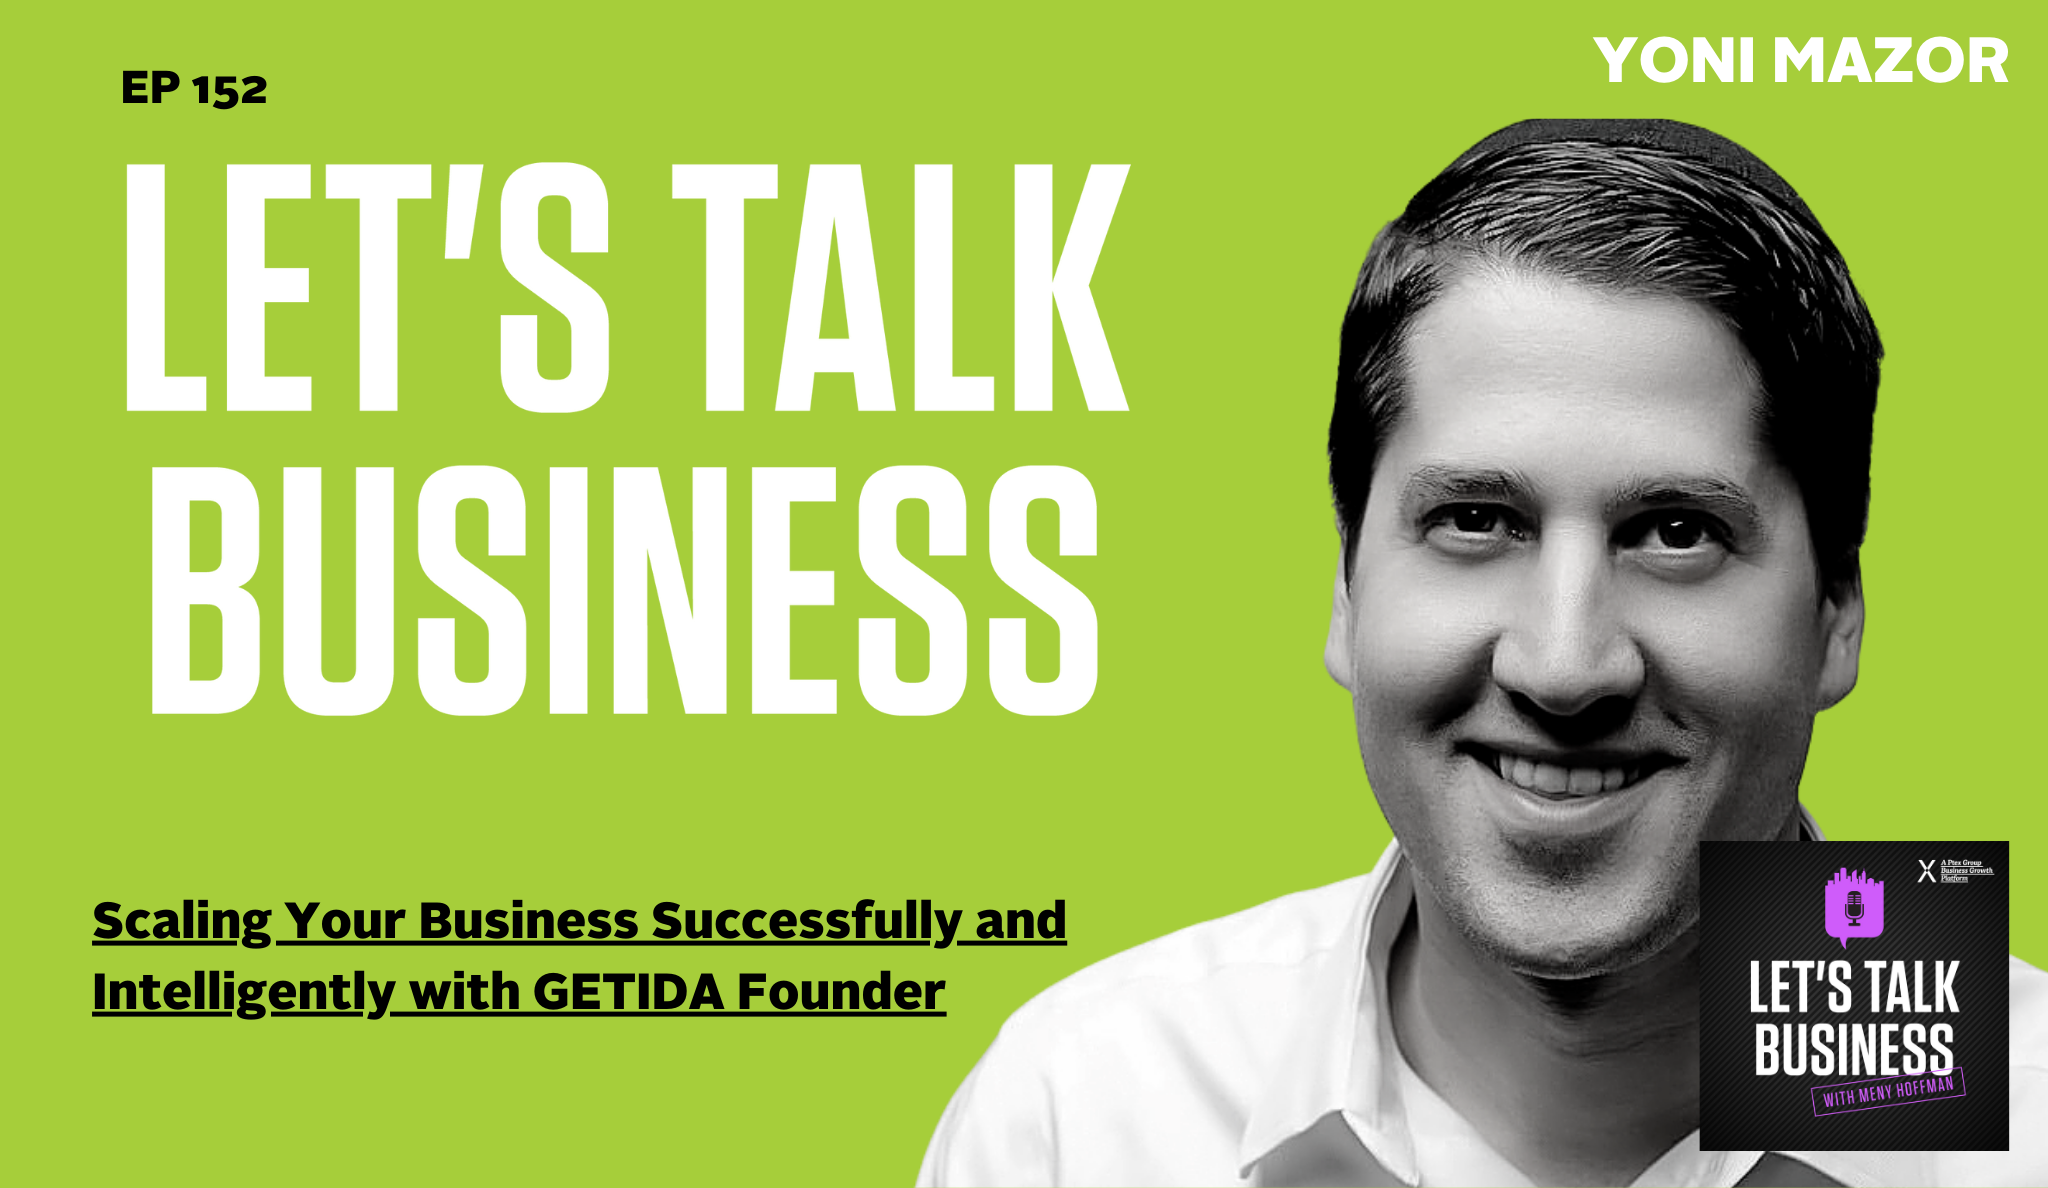 Scaling Your Business Successfully and Intelligently with GETIDA Founder Yoni Mazor